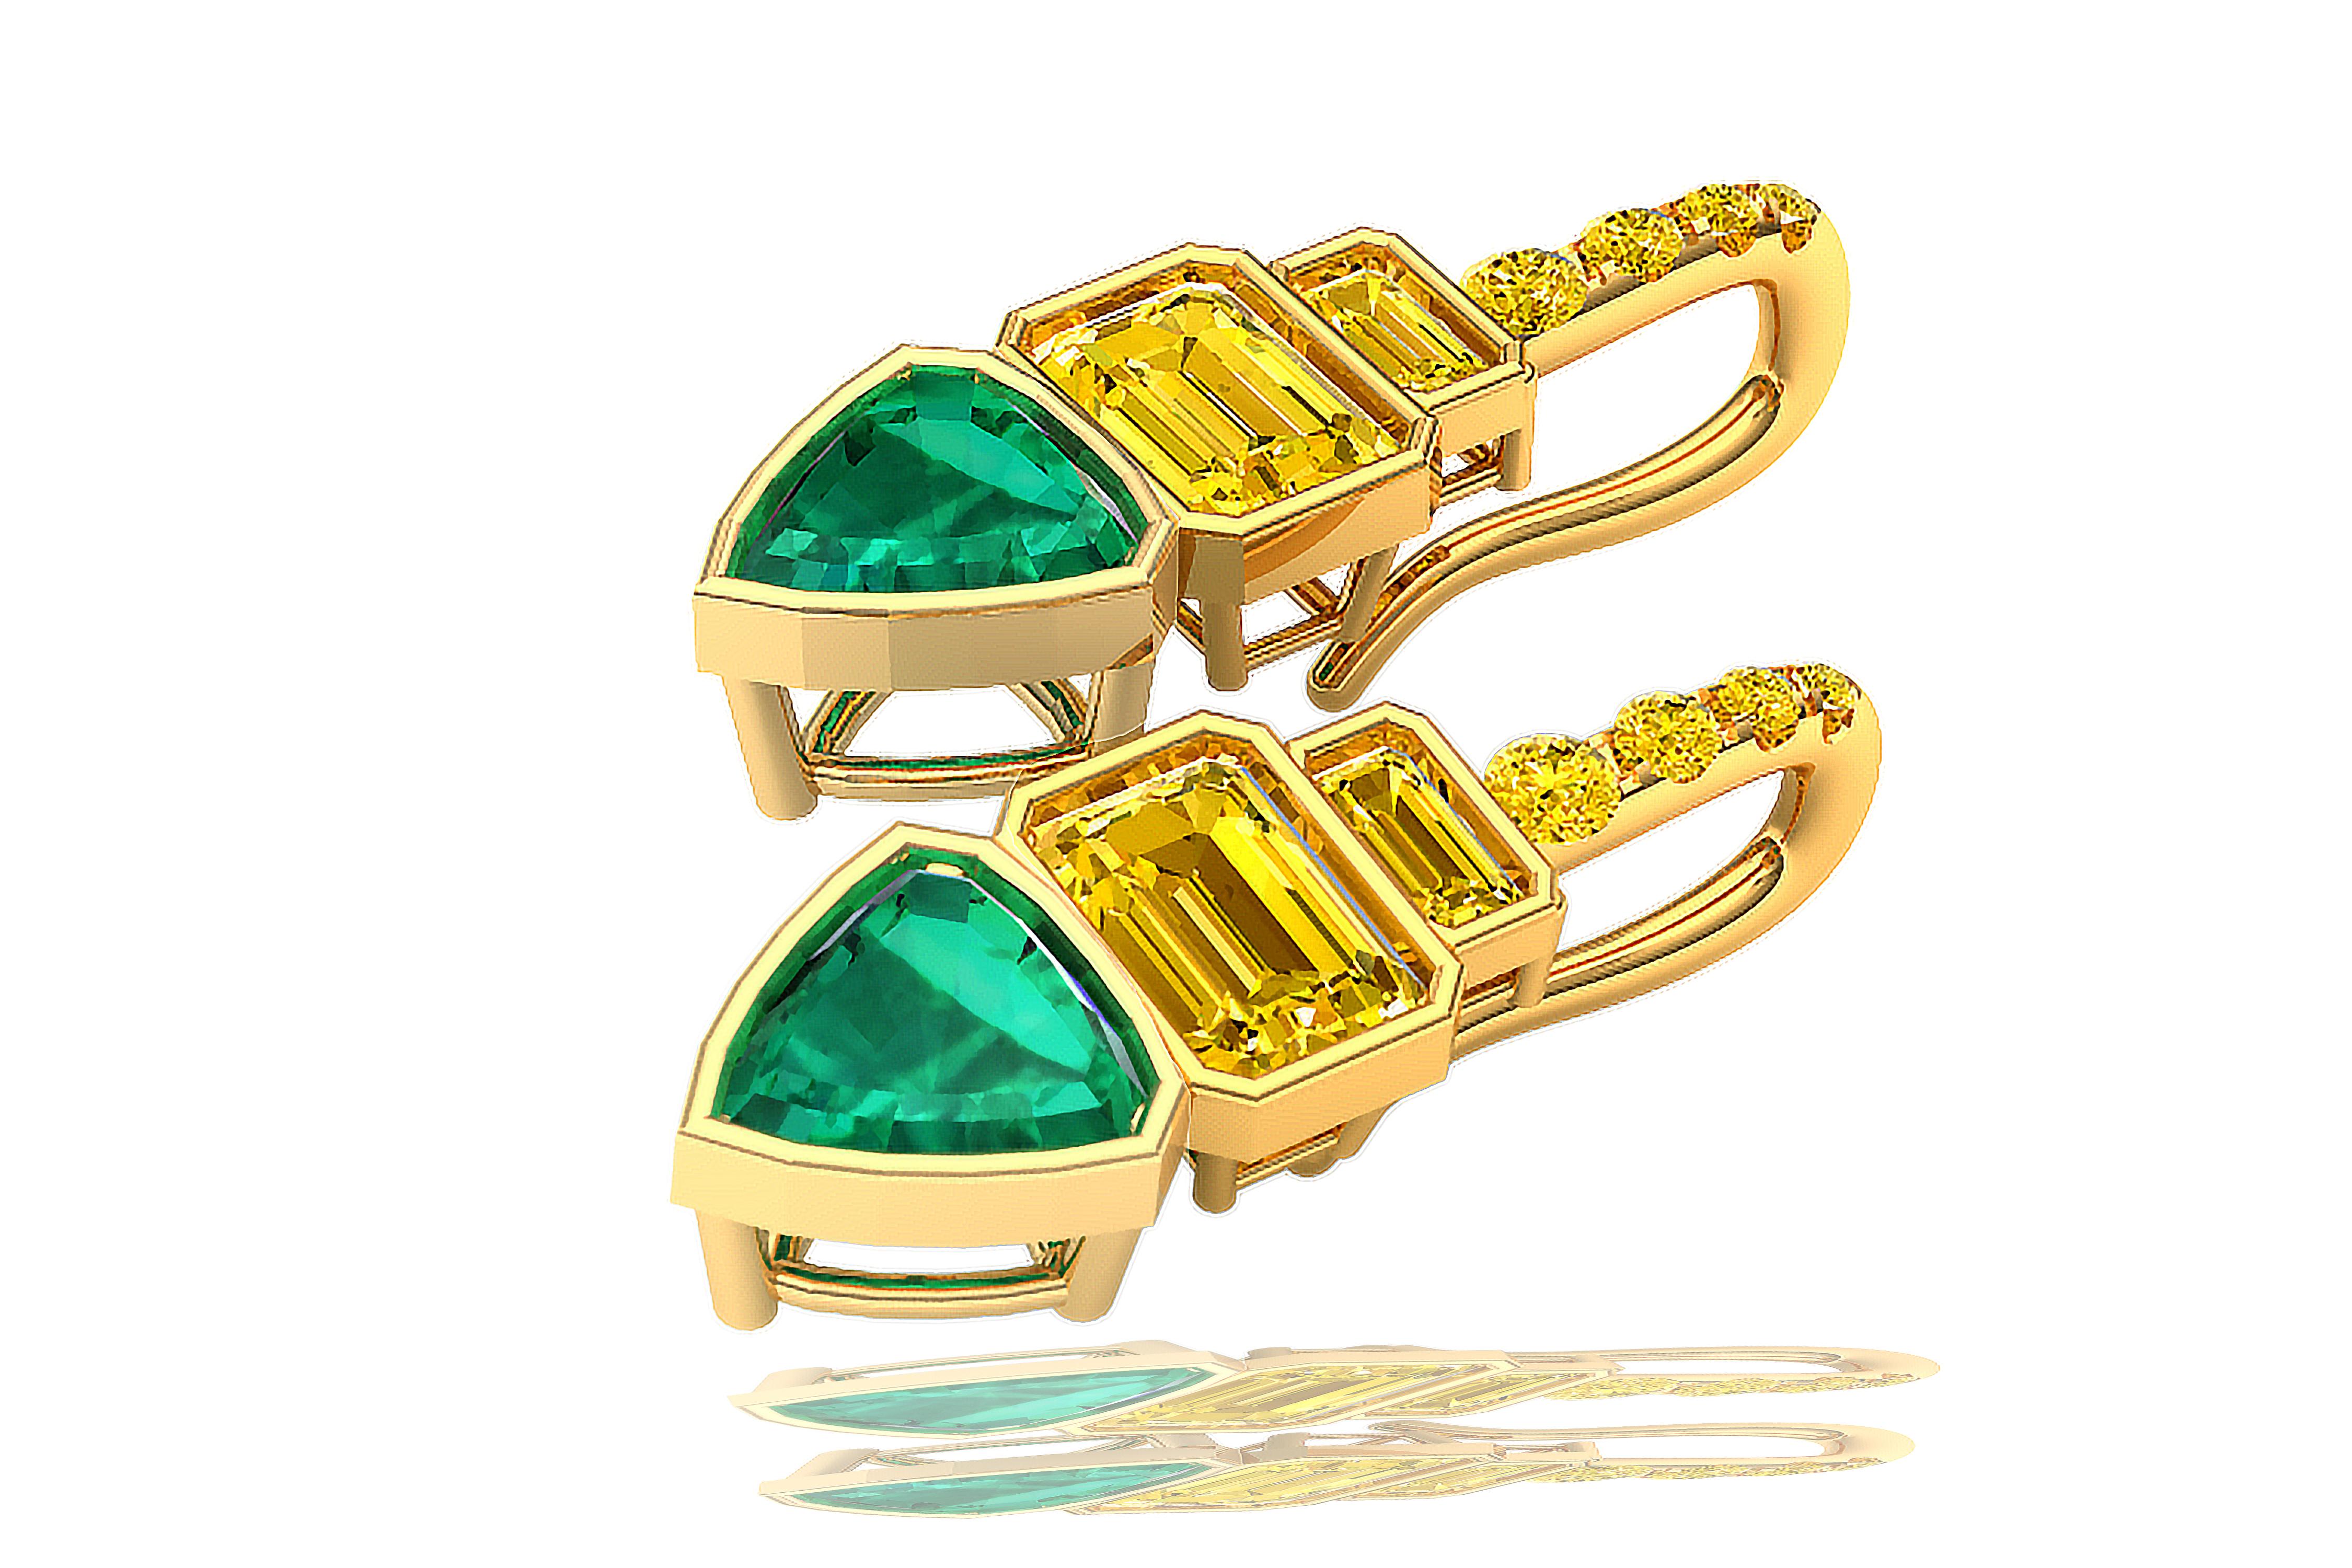 A stunning pair of rare and vivid yellow diamond earrings can be seen here.  The drop earrings are made of trillion cut emeralds that have a rich green color and are eye clean.  The emeralds weigh between .65 to .85 carats each.  The emeralds are